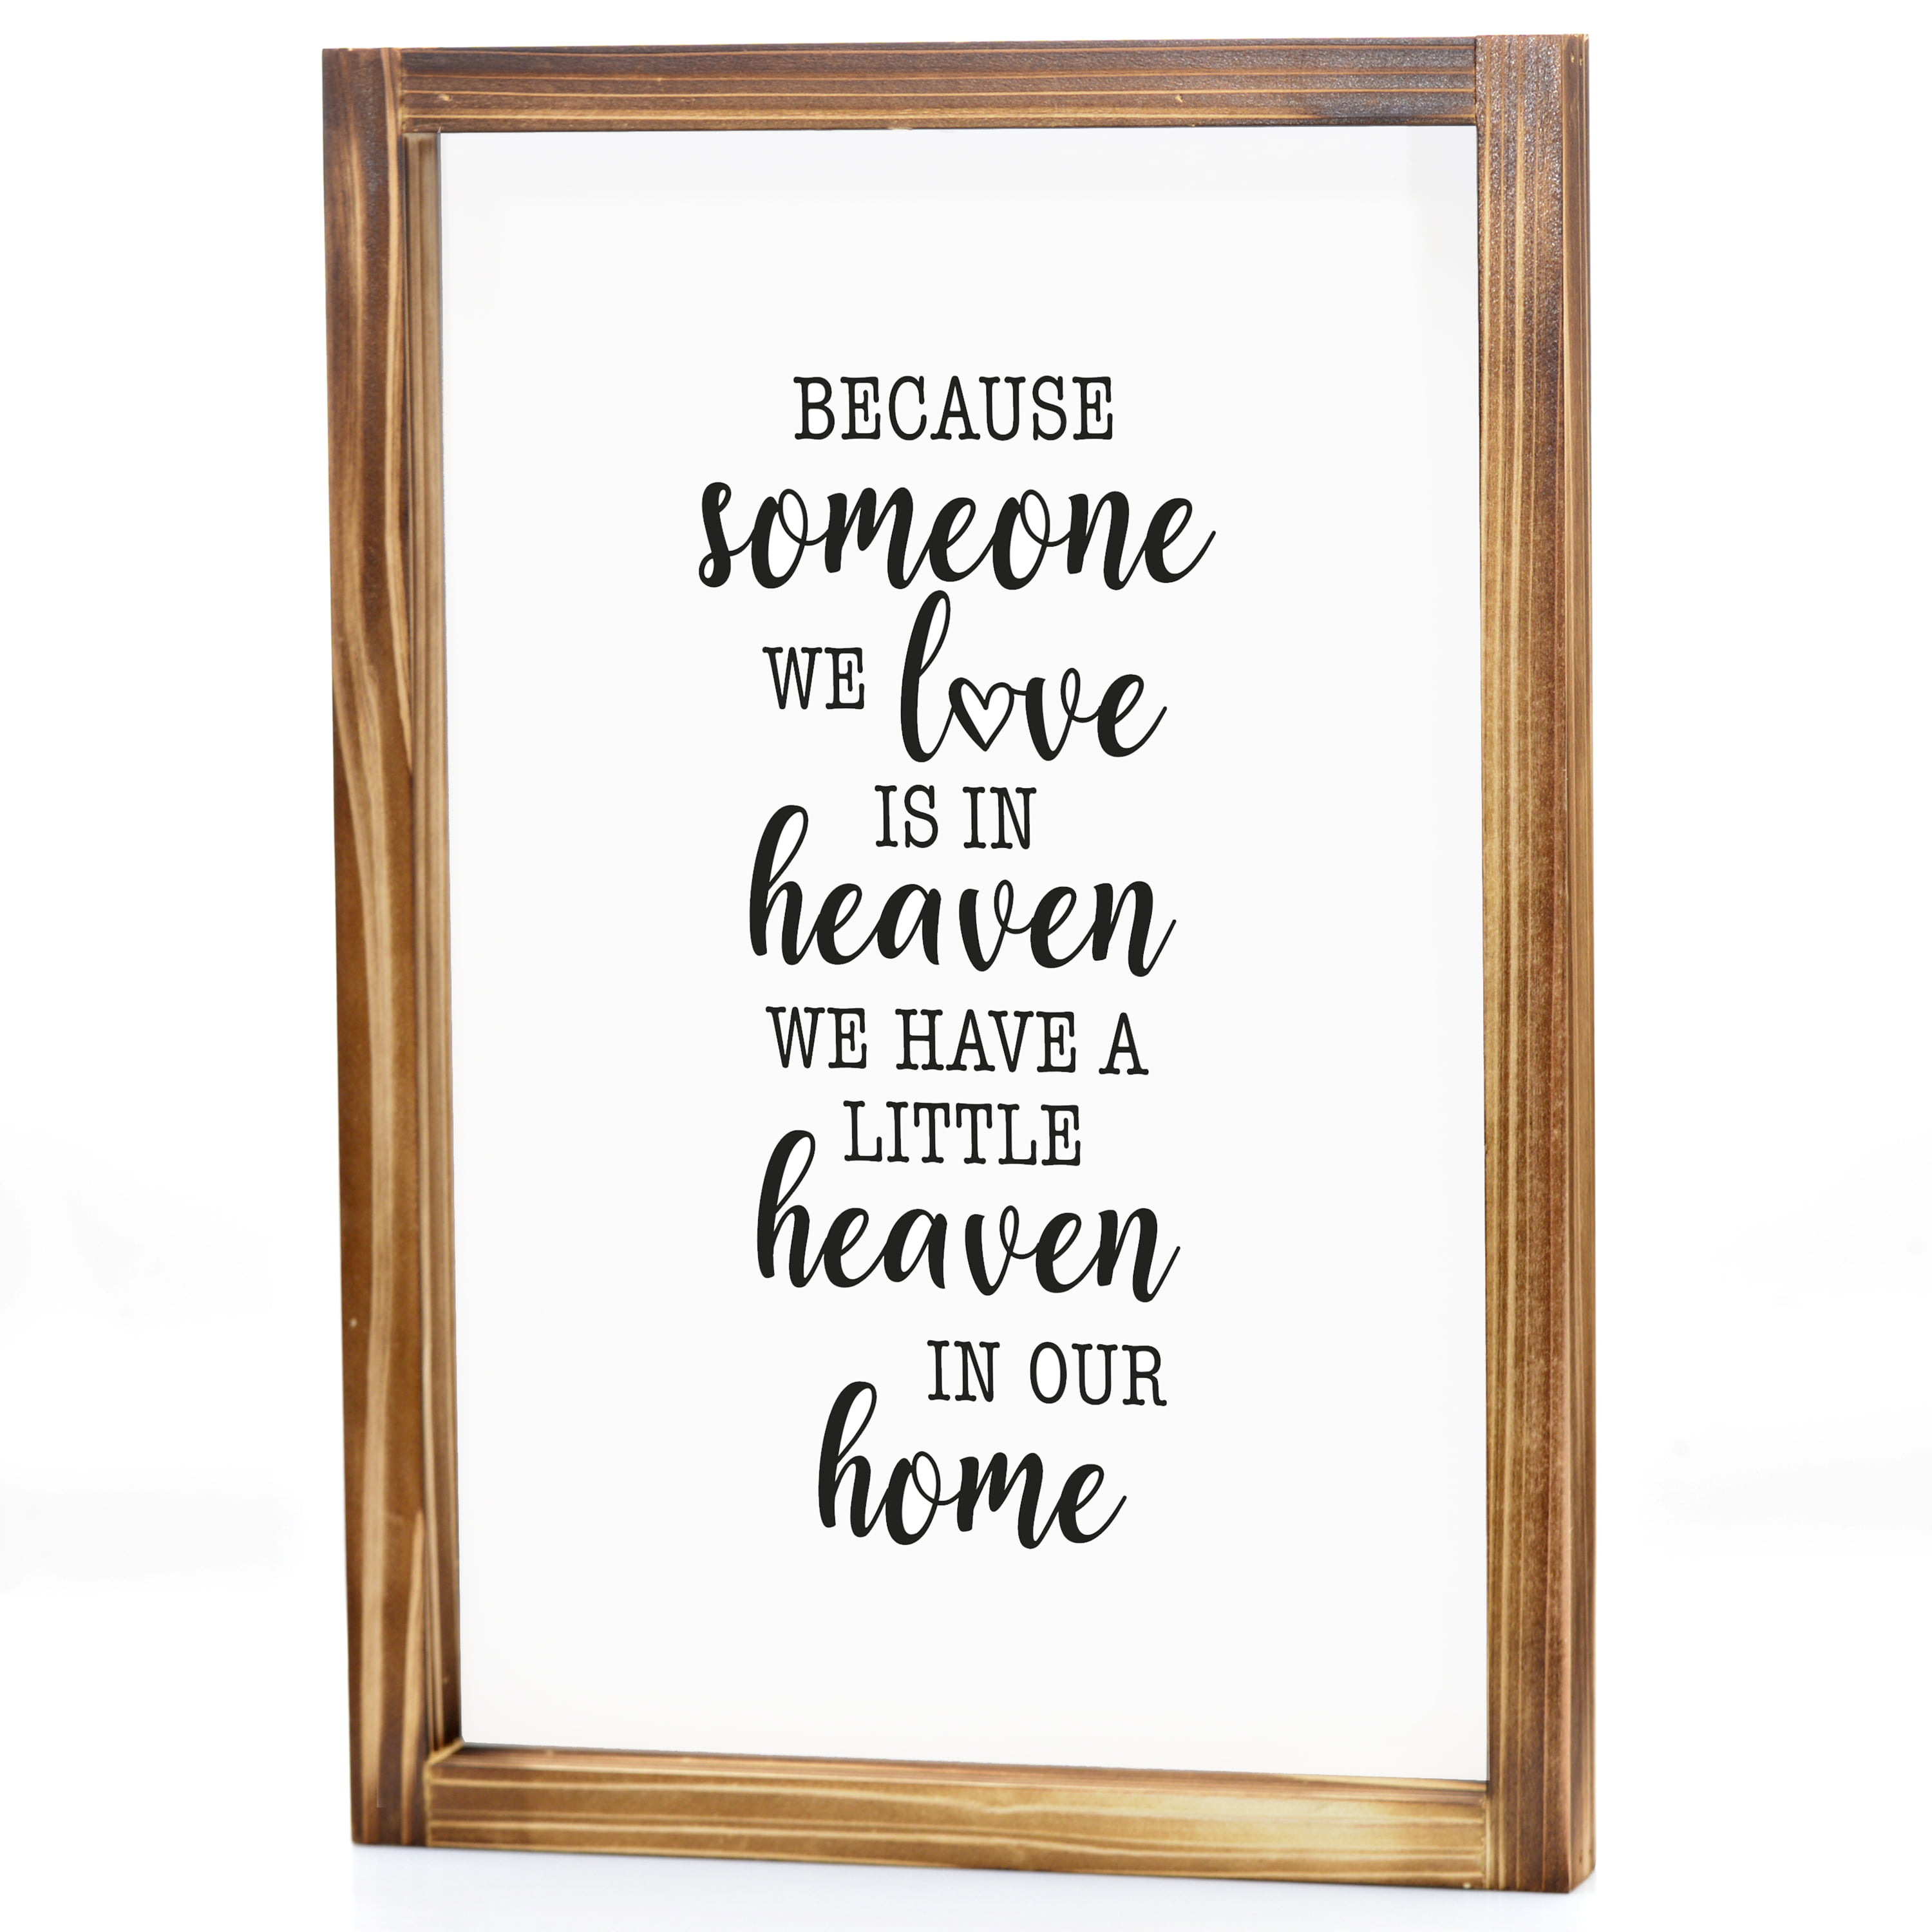 custom decor Because someone we love is in Heaven Sign rustic wood sign farmhouse home decor wedding anniversary housewarming gift